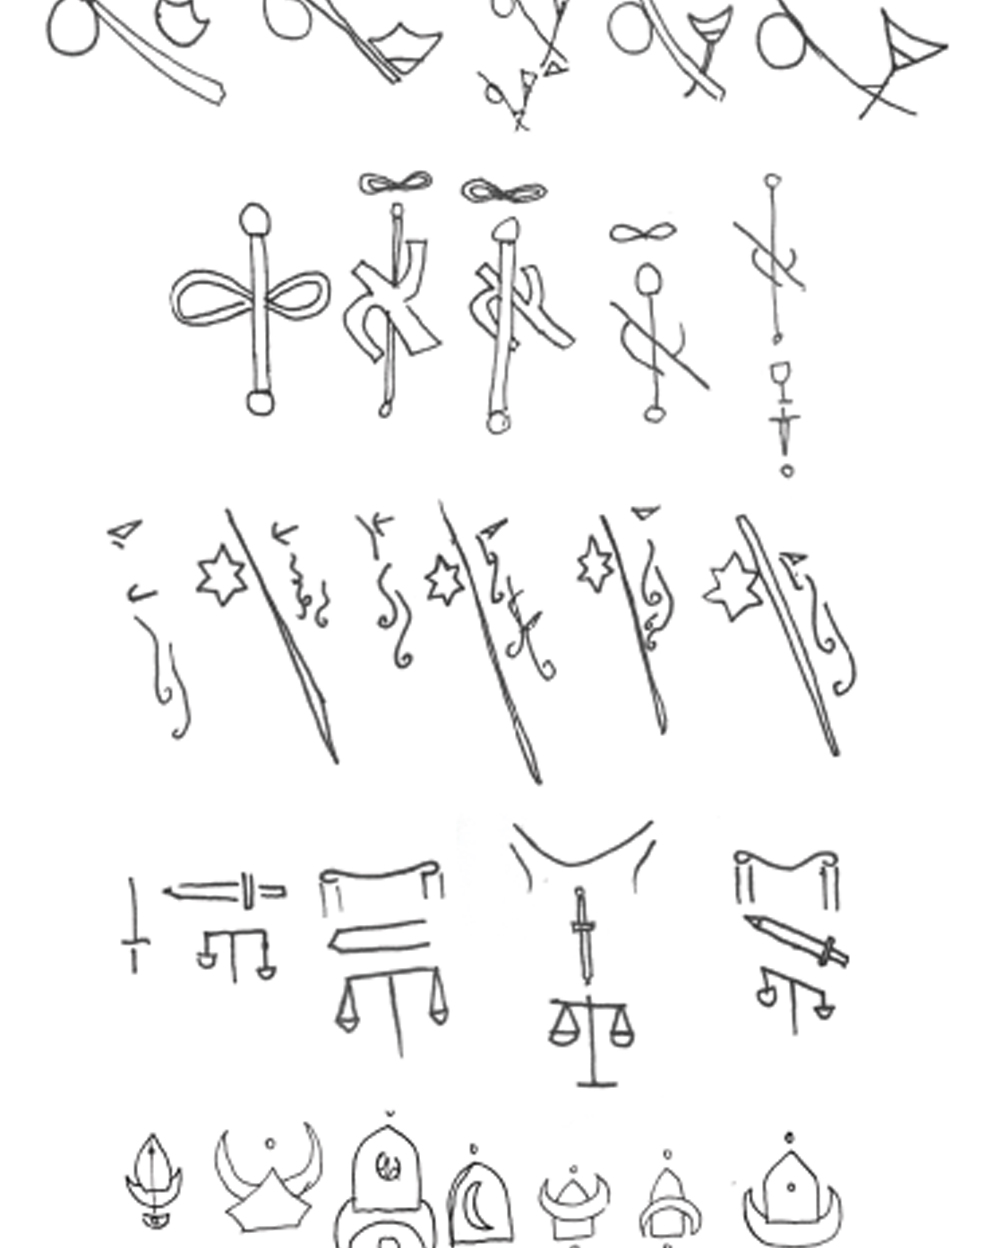 Various symbol sketches from artist.